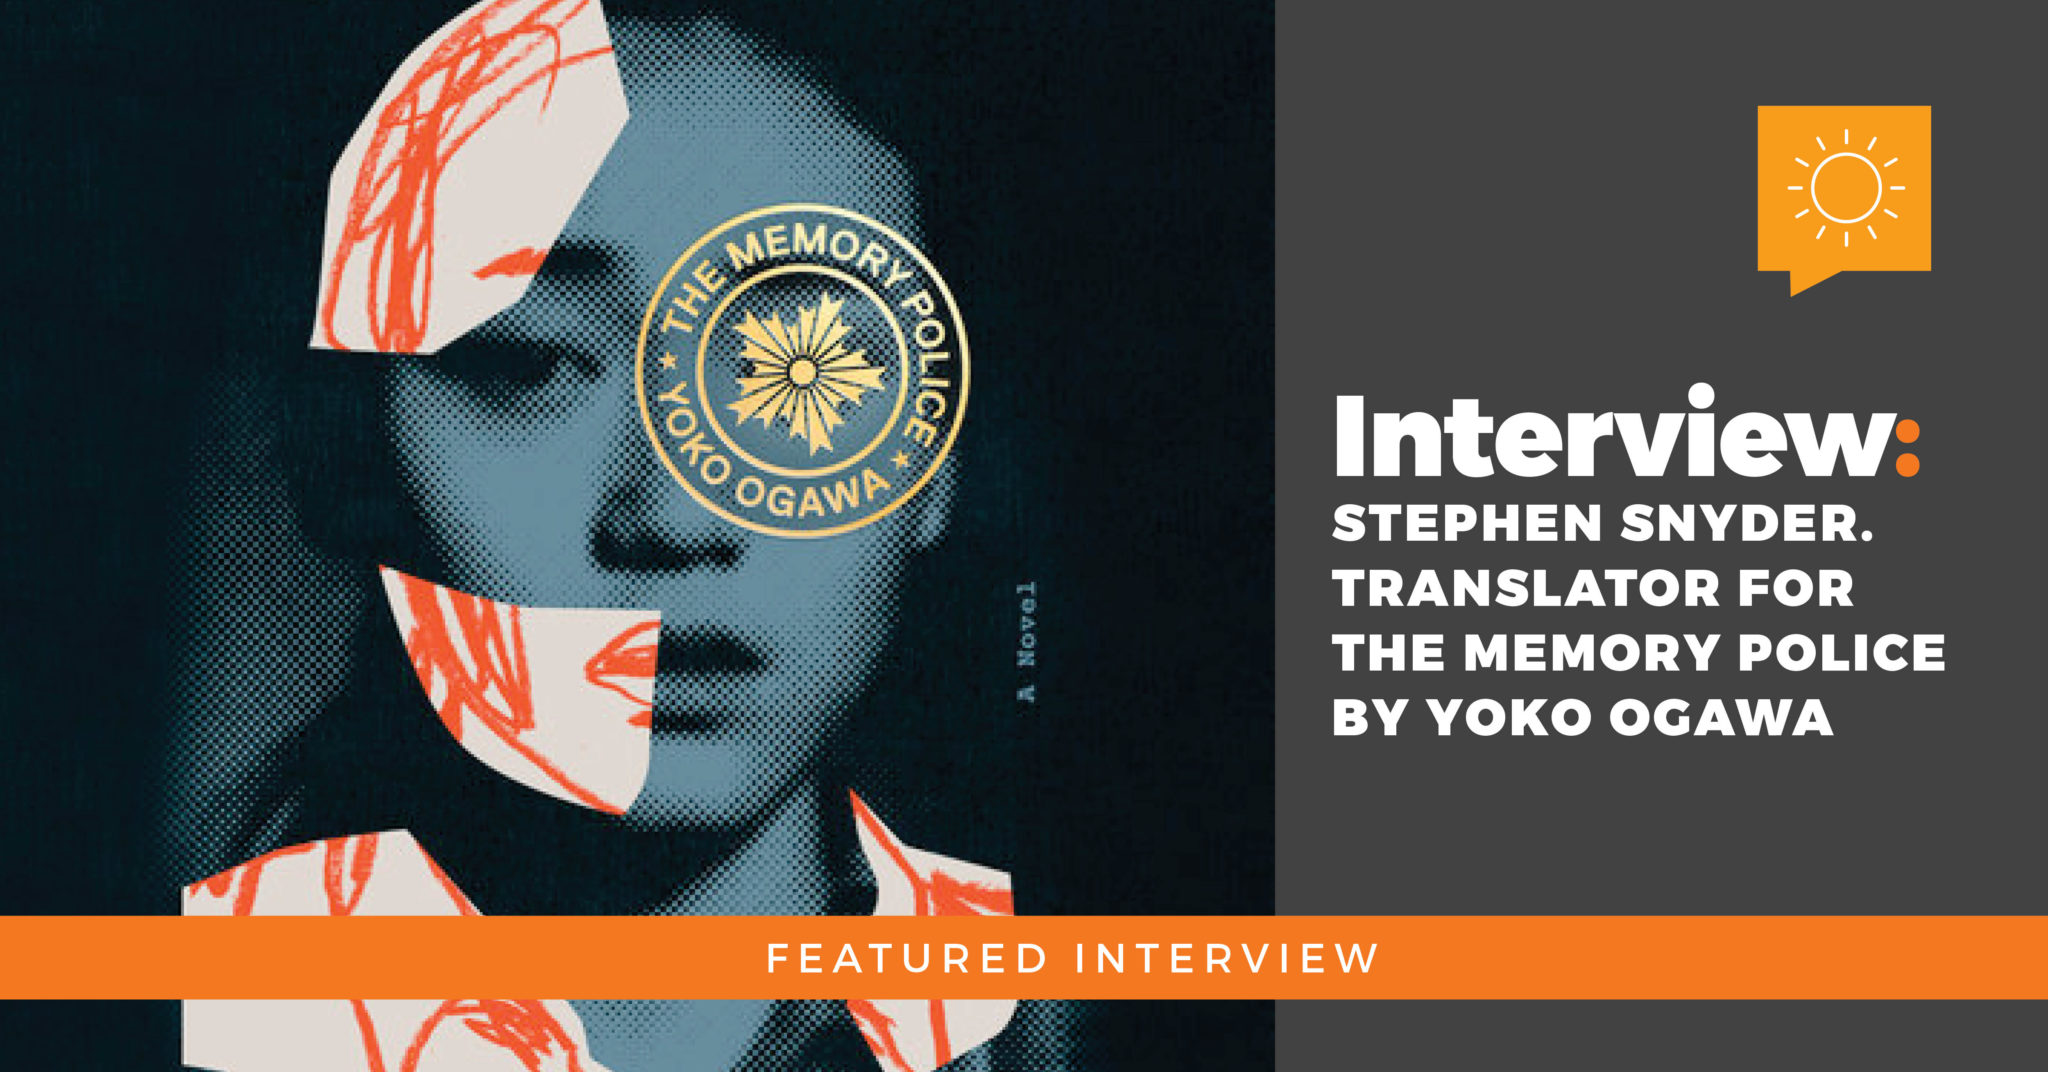 Interview: Stephen Snyder. Translator for The Memory Police by Yoko Ogawa